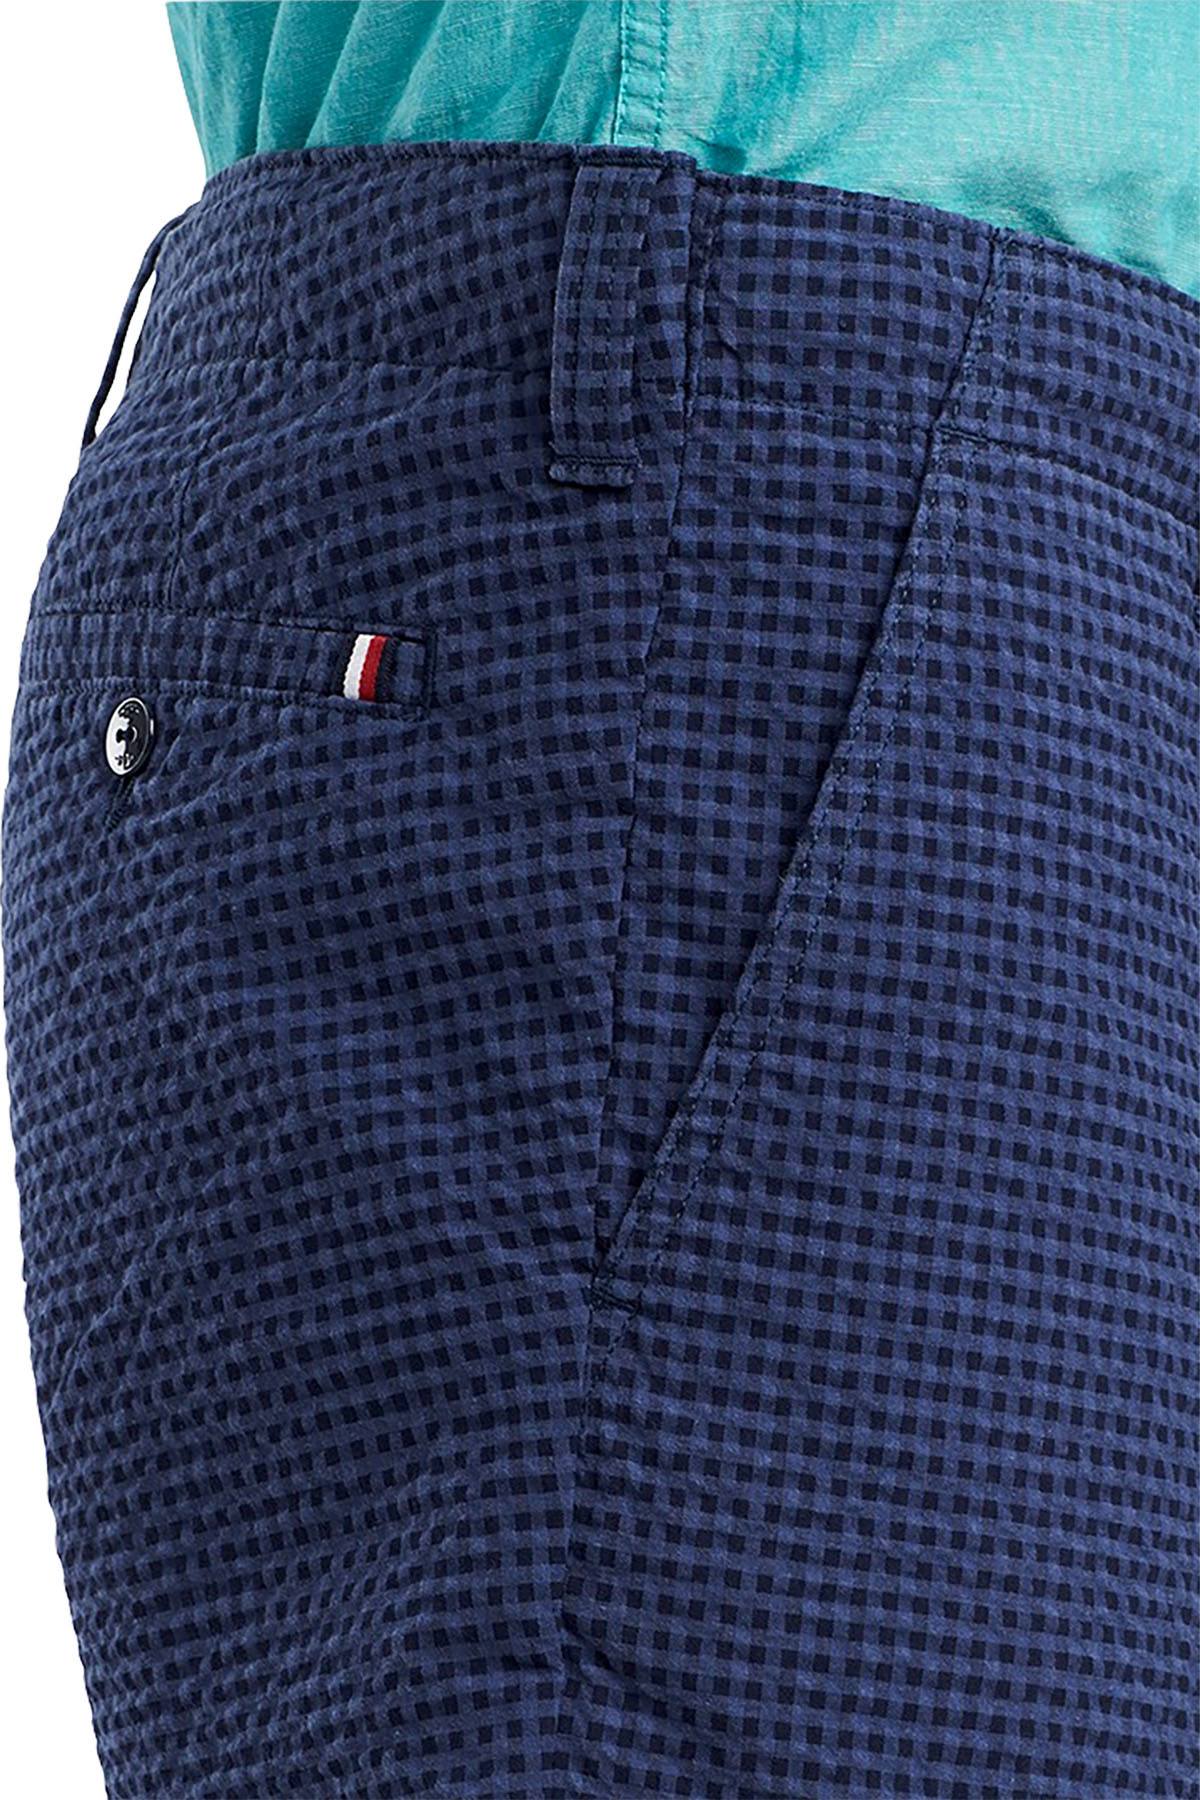 Tommy Hilfiger As-Is-Blue Gingham 9" Jerry Short